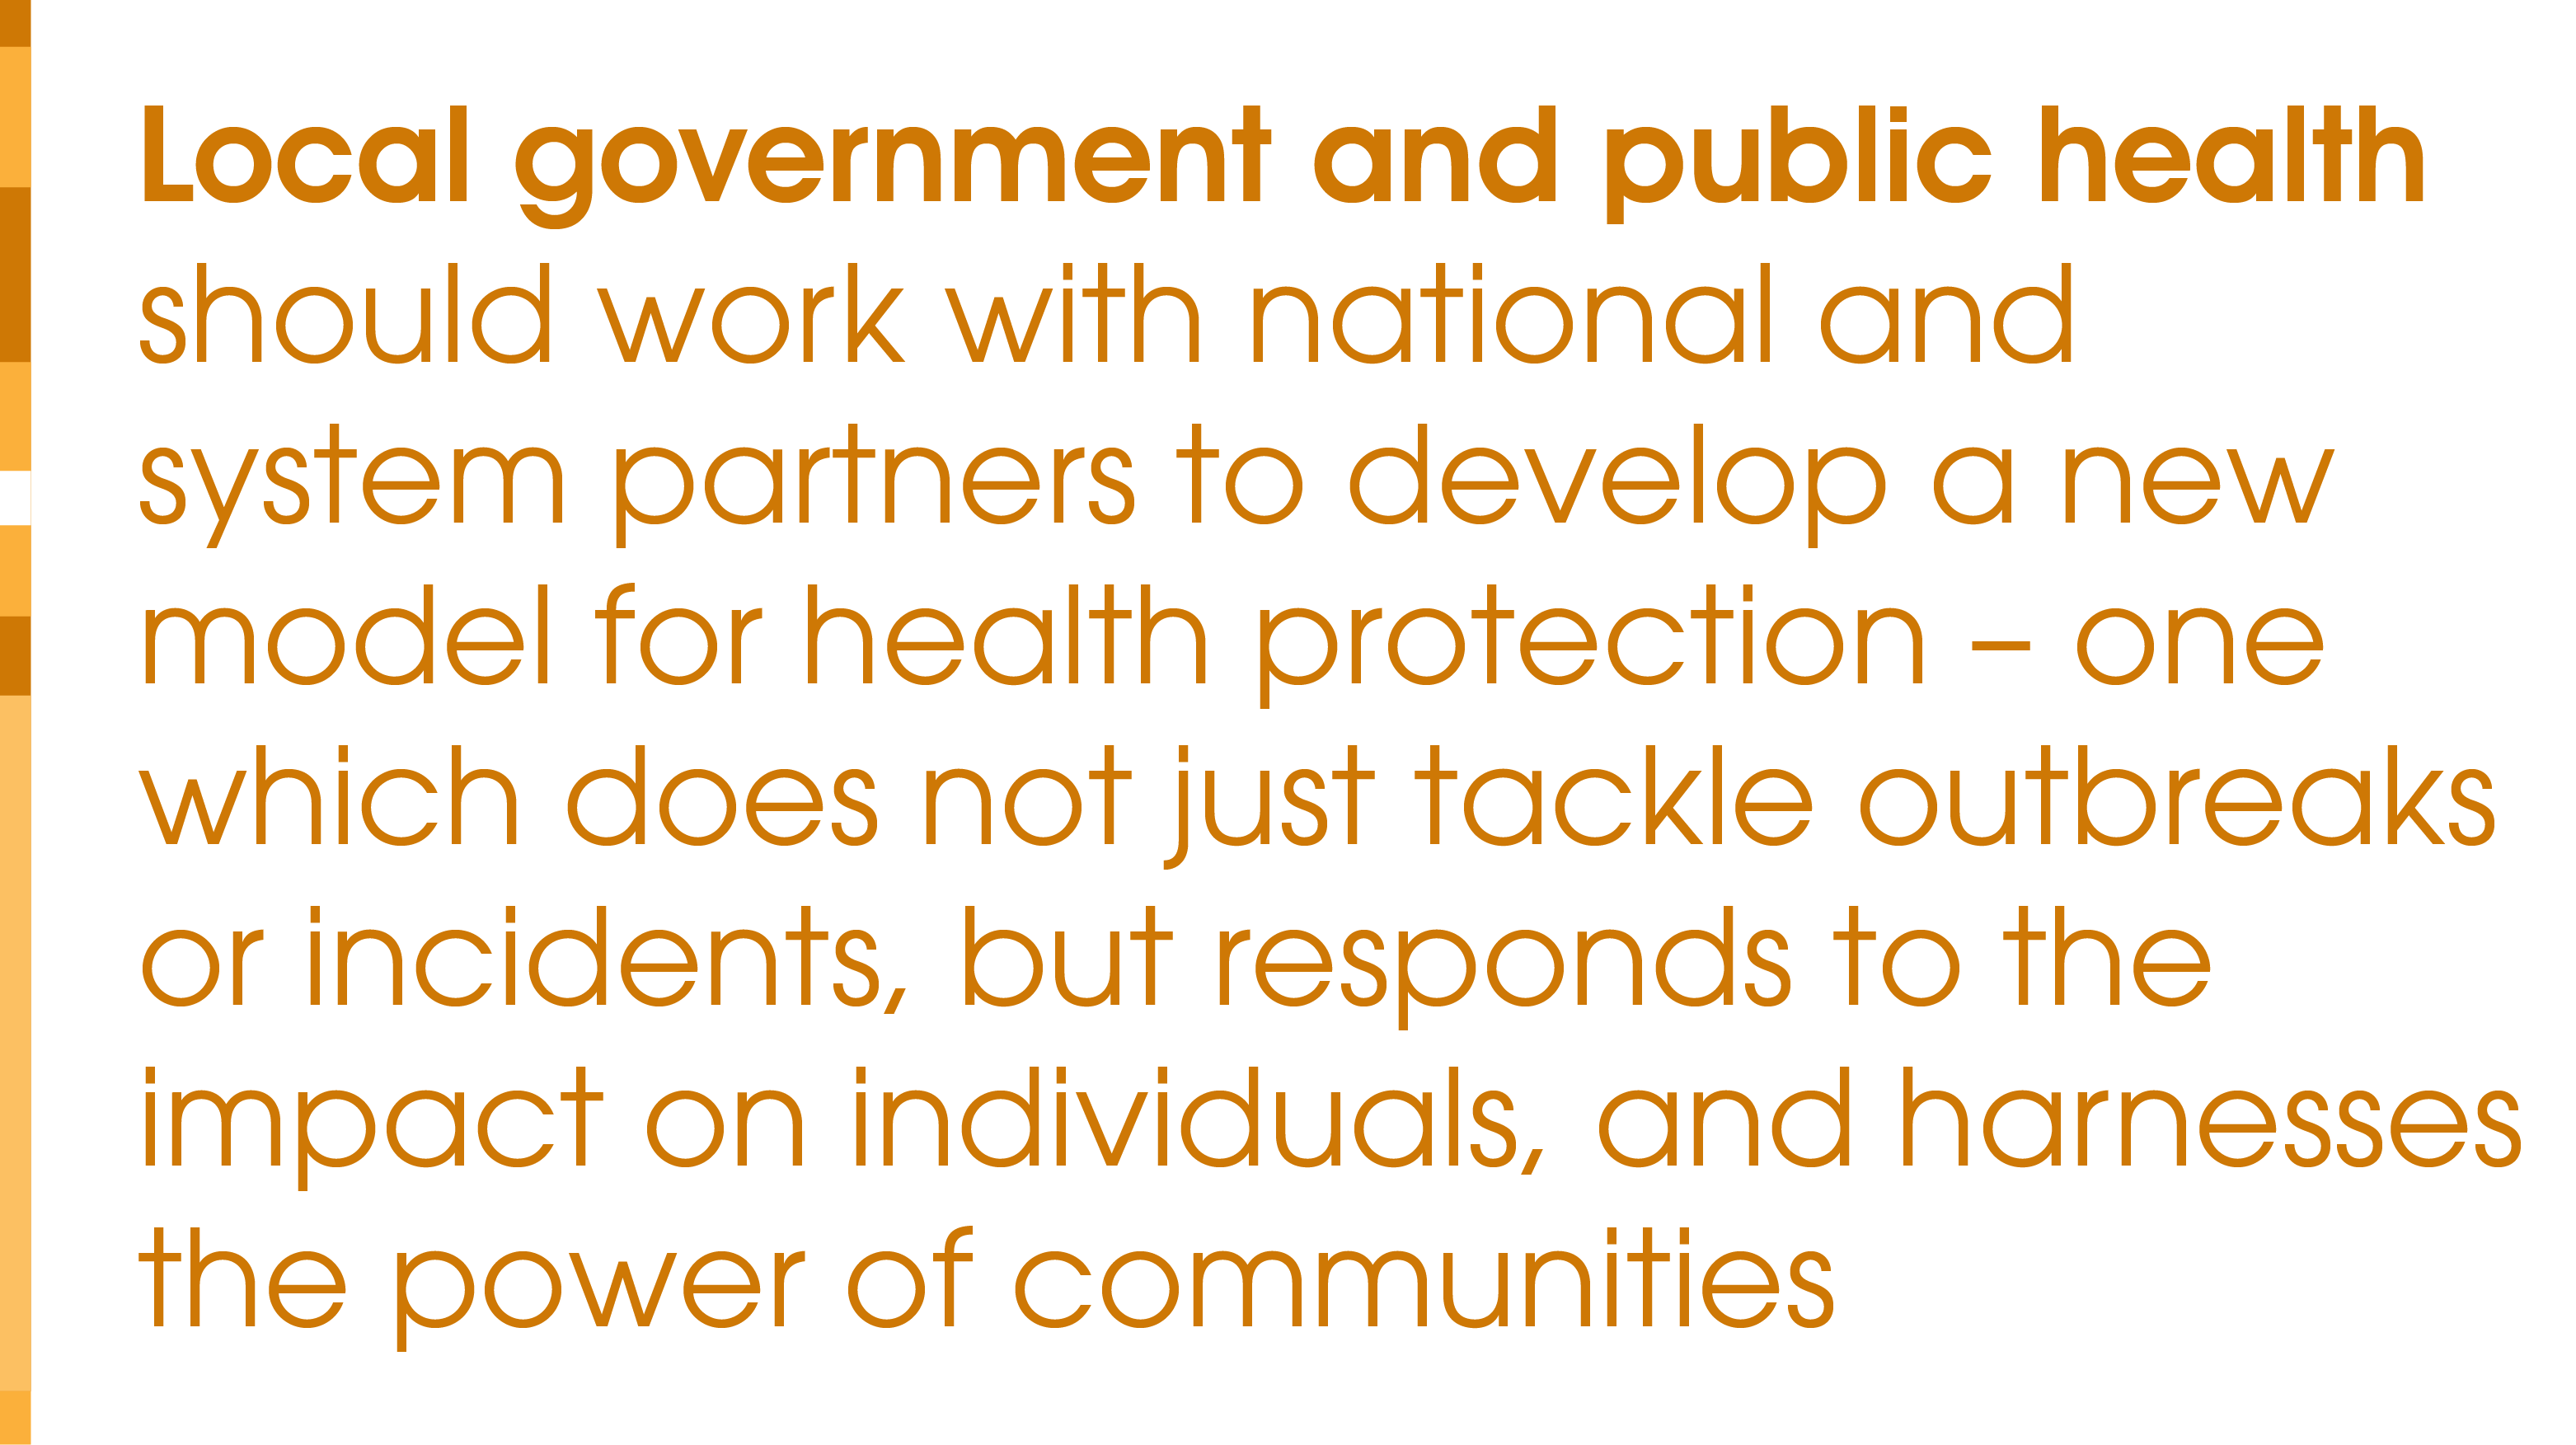 Local government and public health should work with national and system partners to develop a new model for health protection – one which does not just tackle outbreaks or incidents, but responds to the impact on individuals, and harnesses the power of communities.